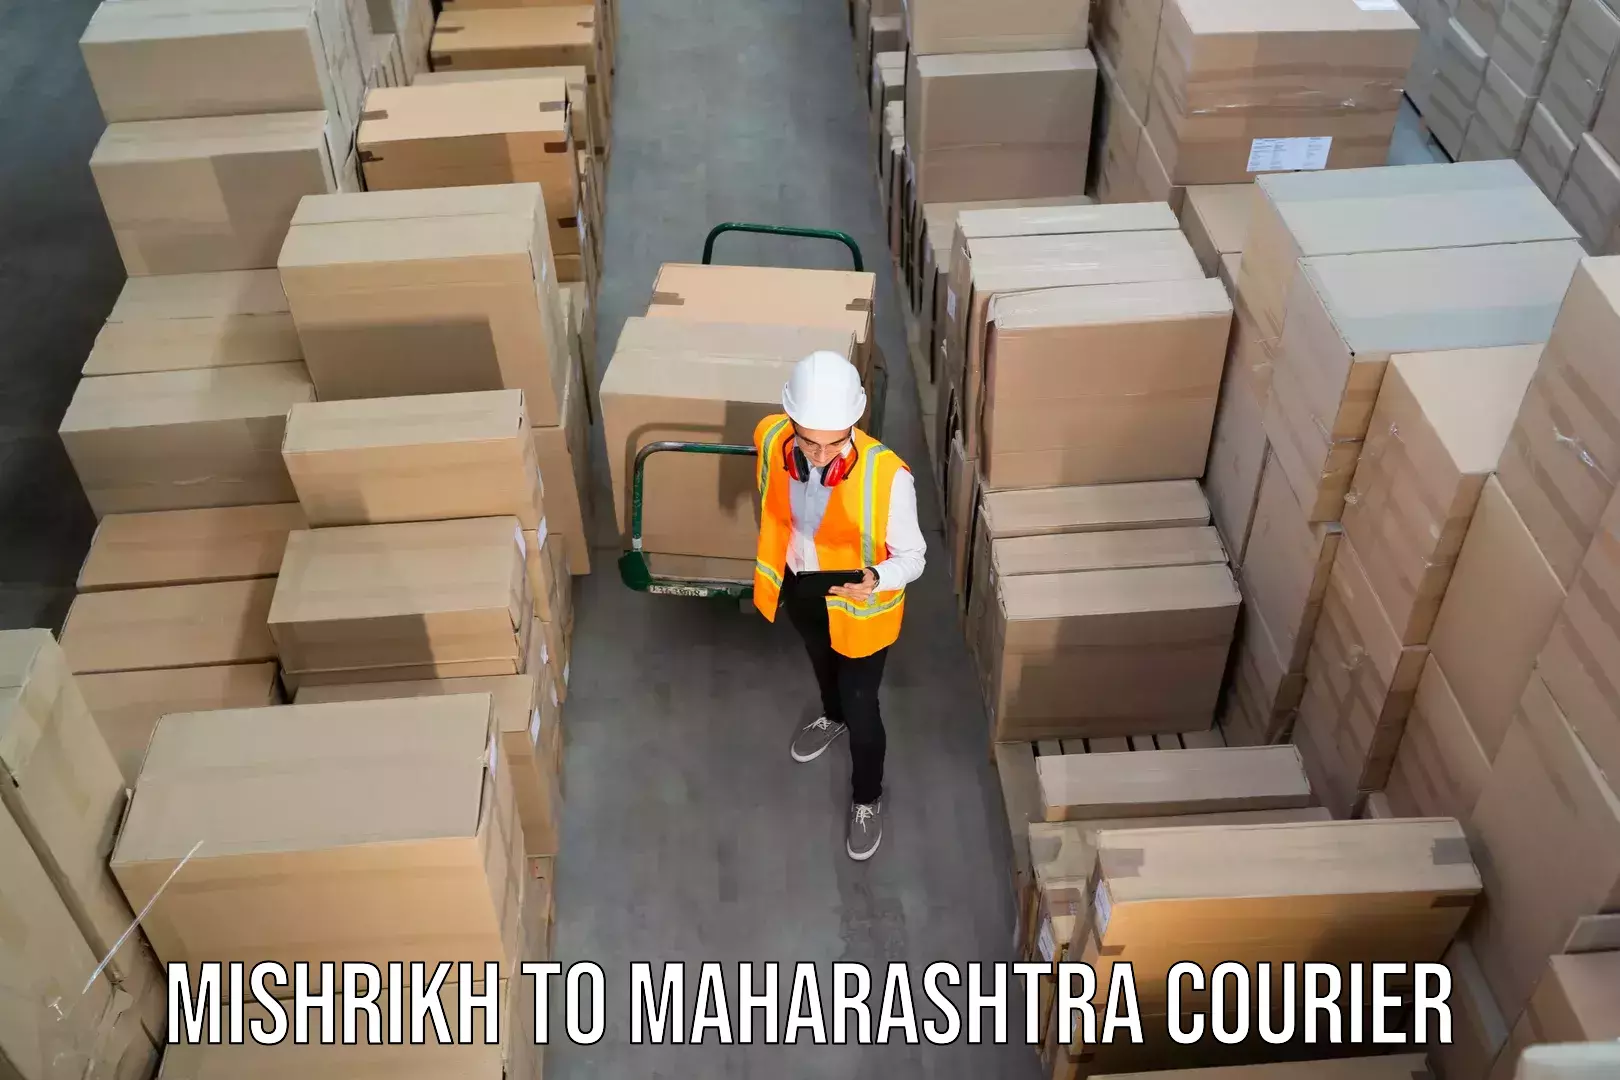 Multi-national courier services Mishrikh to Dadar